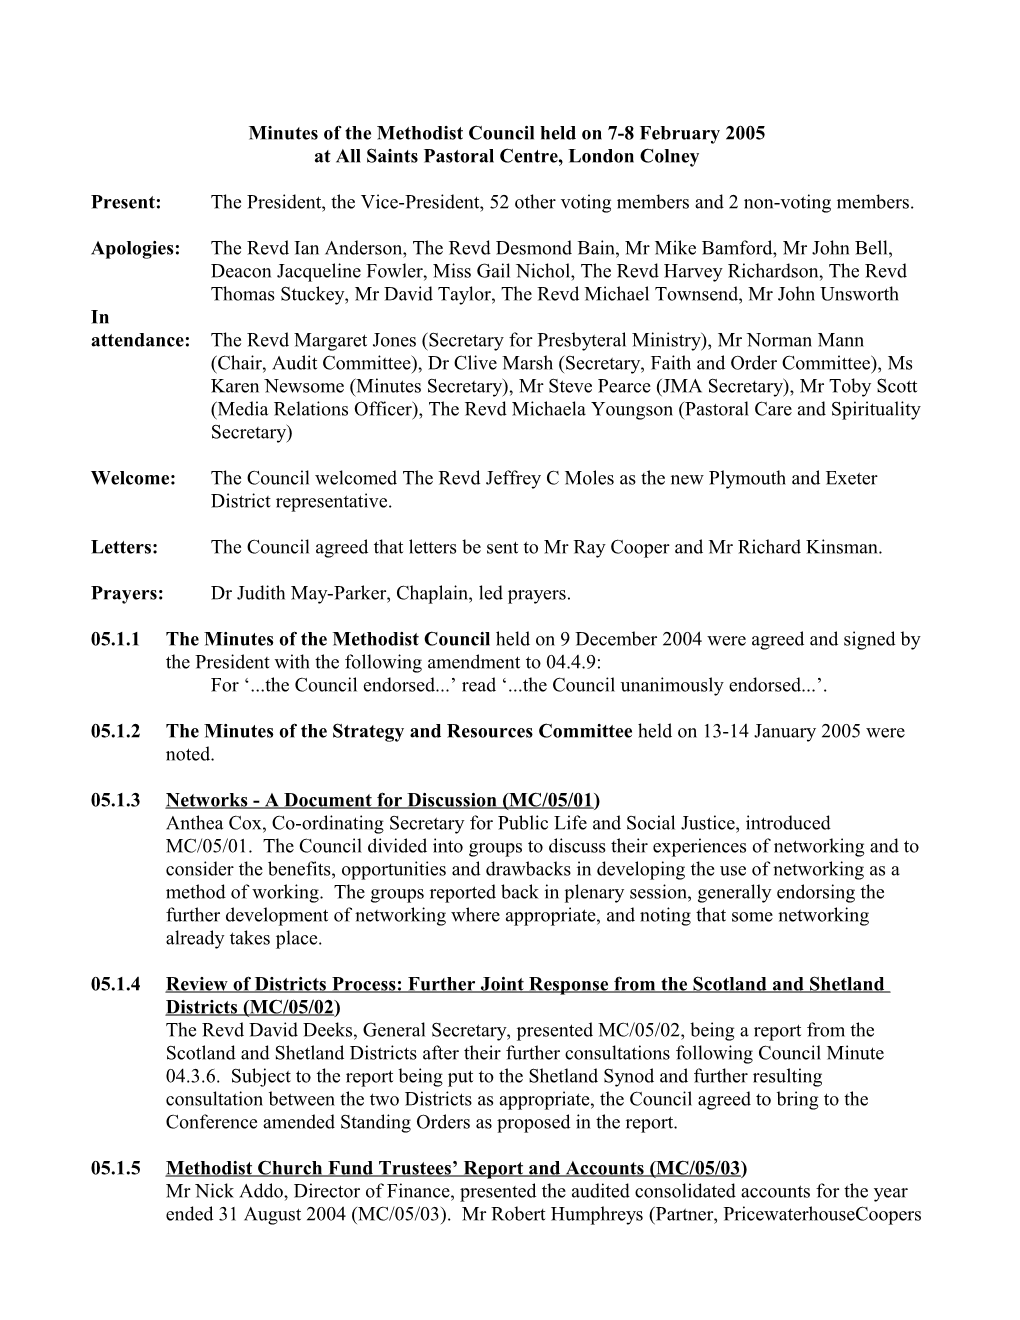 Minutes of the Methodist Council Held on 7-8 February 2005